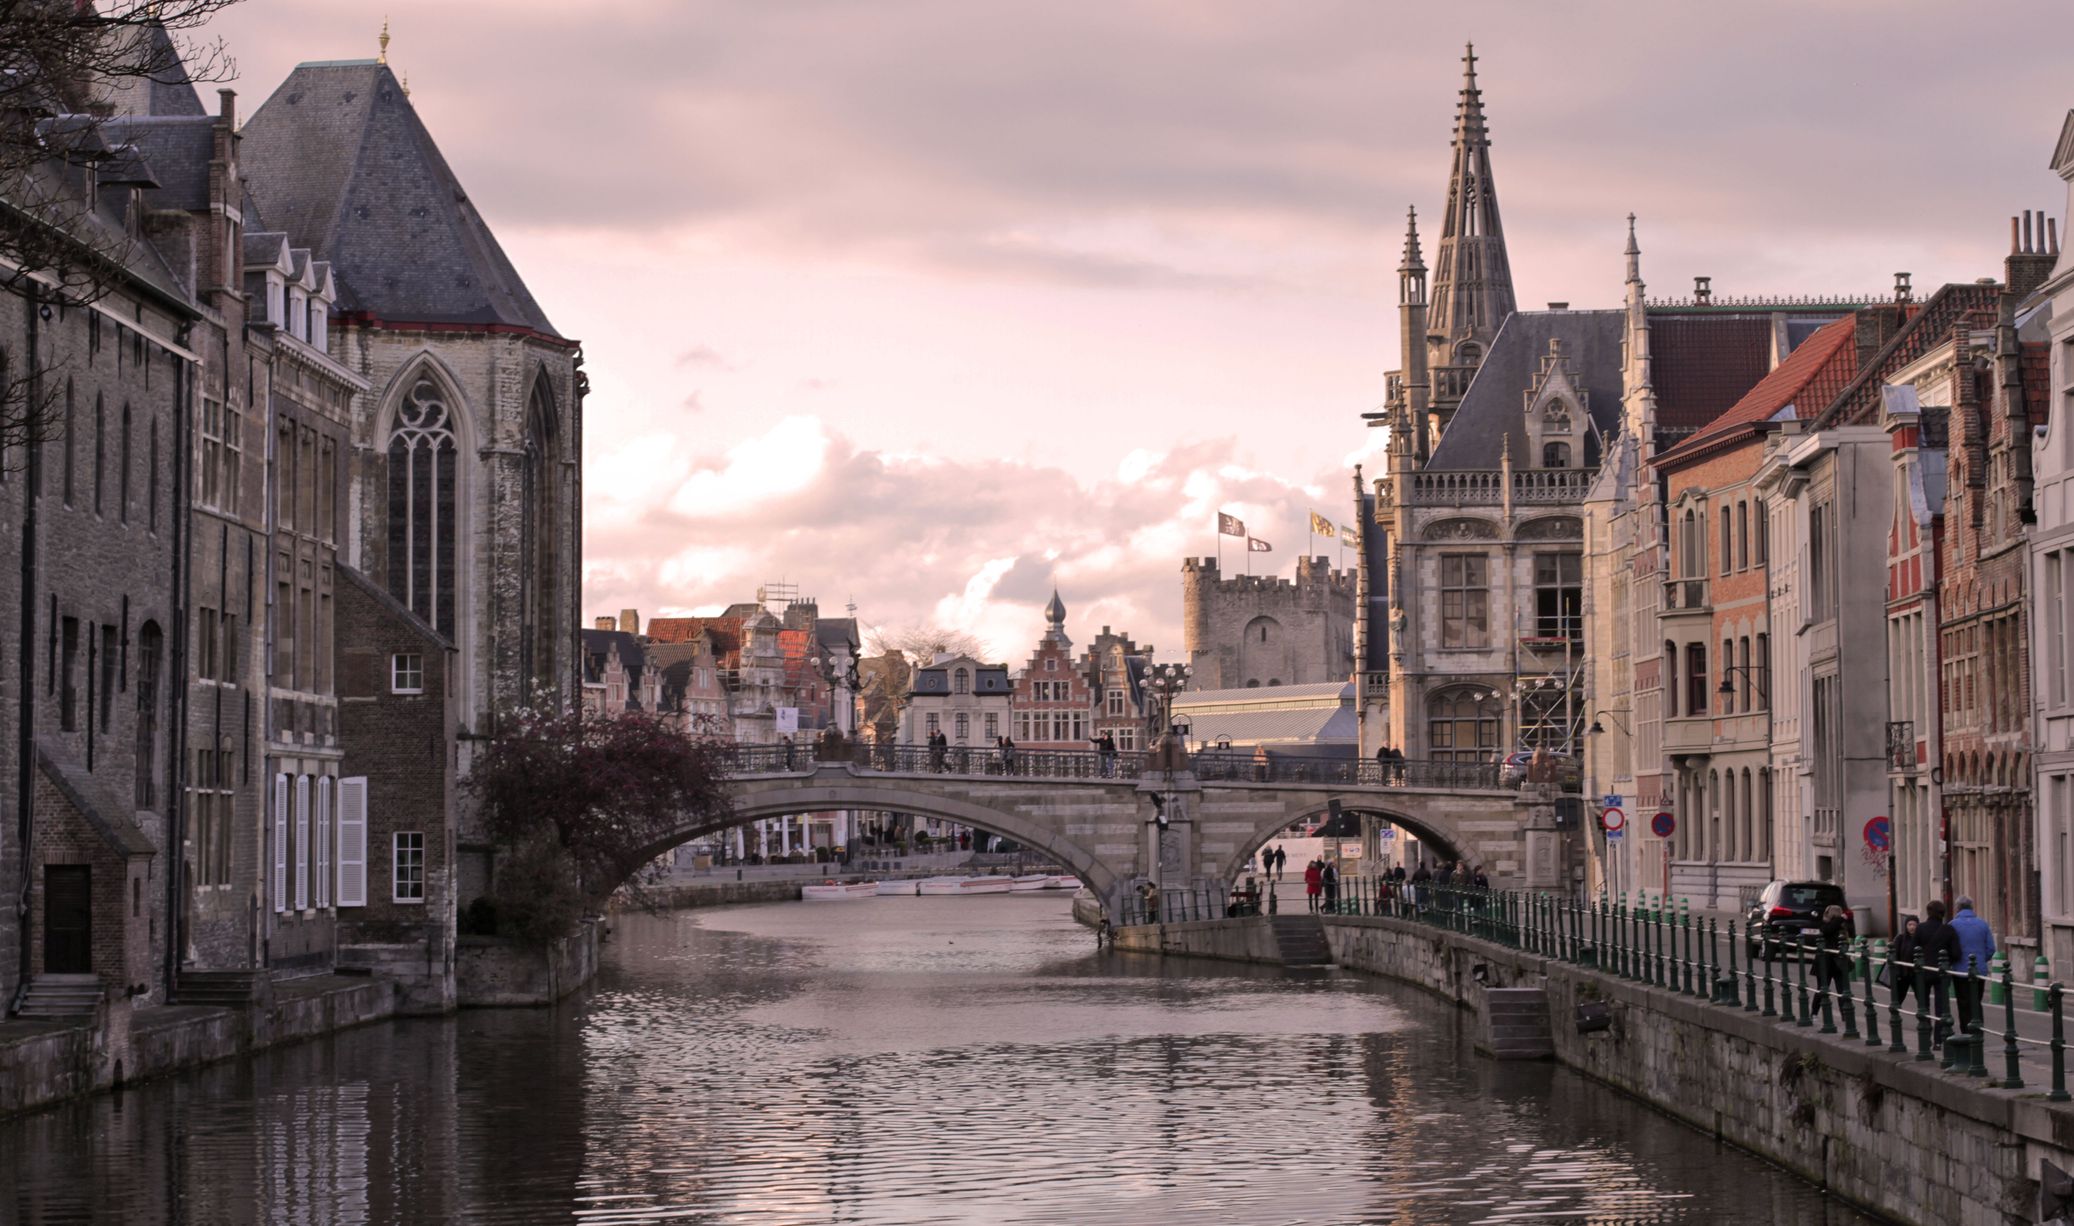 One day in Ghent